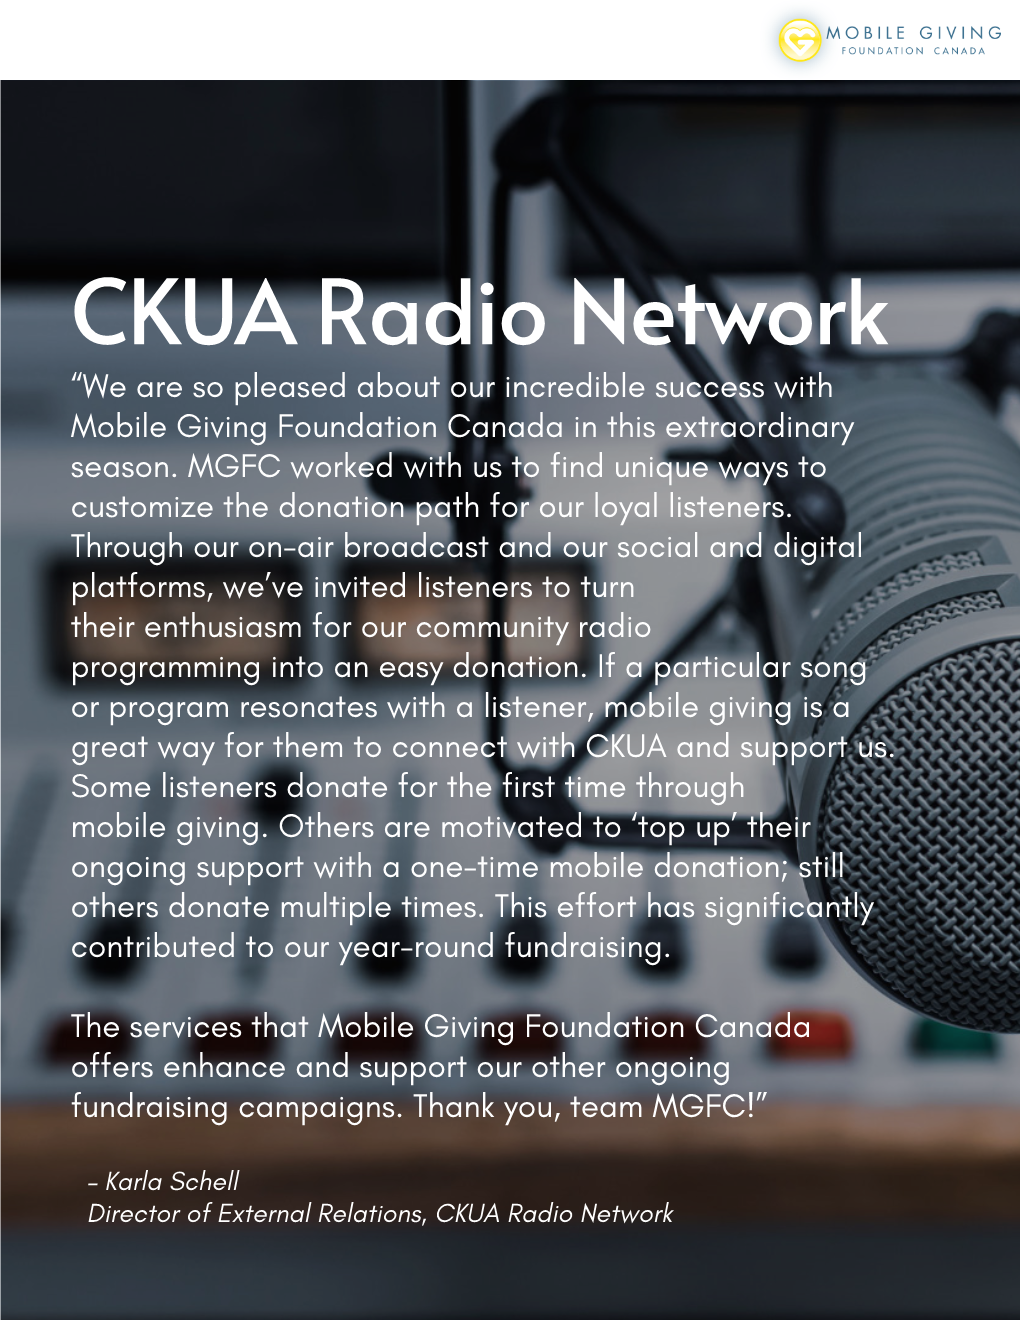 CKUA Radio Network “We Are So Pleased About Our Incredible Success with Mobile Giving Foundation Canada in This Extraordinary Season